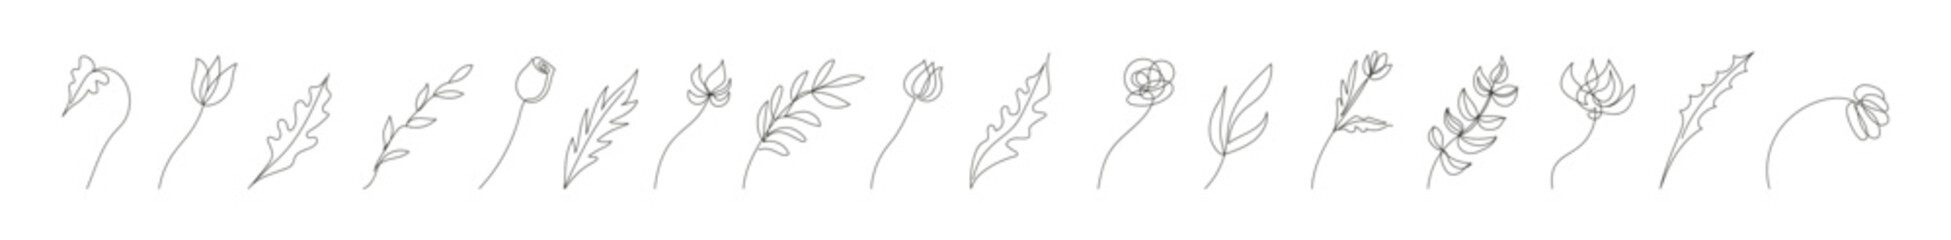 Collection of floral design elements in continuous one line drawing style. Flowers, plants, leaves, branches. Line art. White backdrop. For print, postcard, scrapbooking, coloring book.